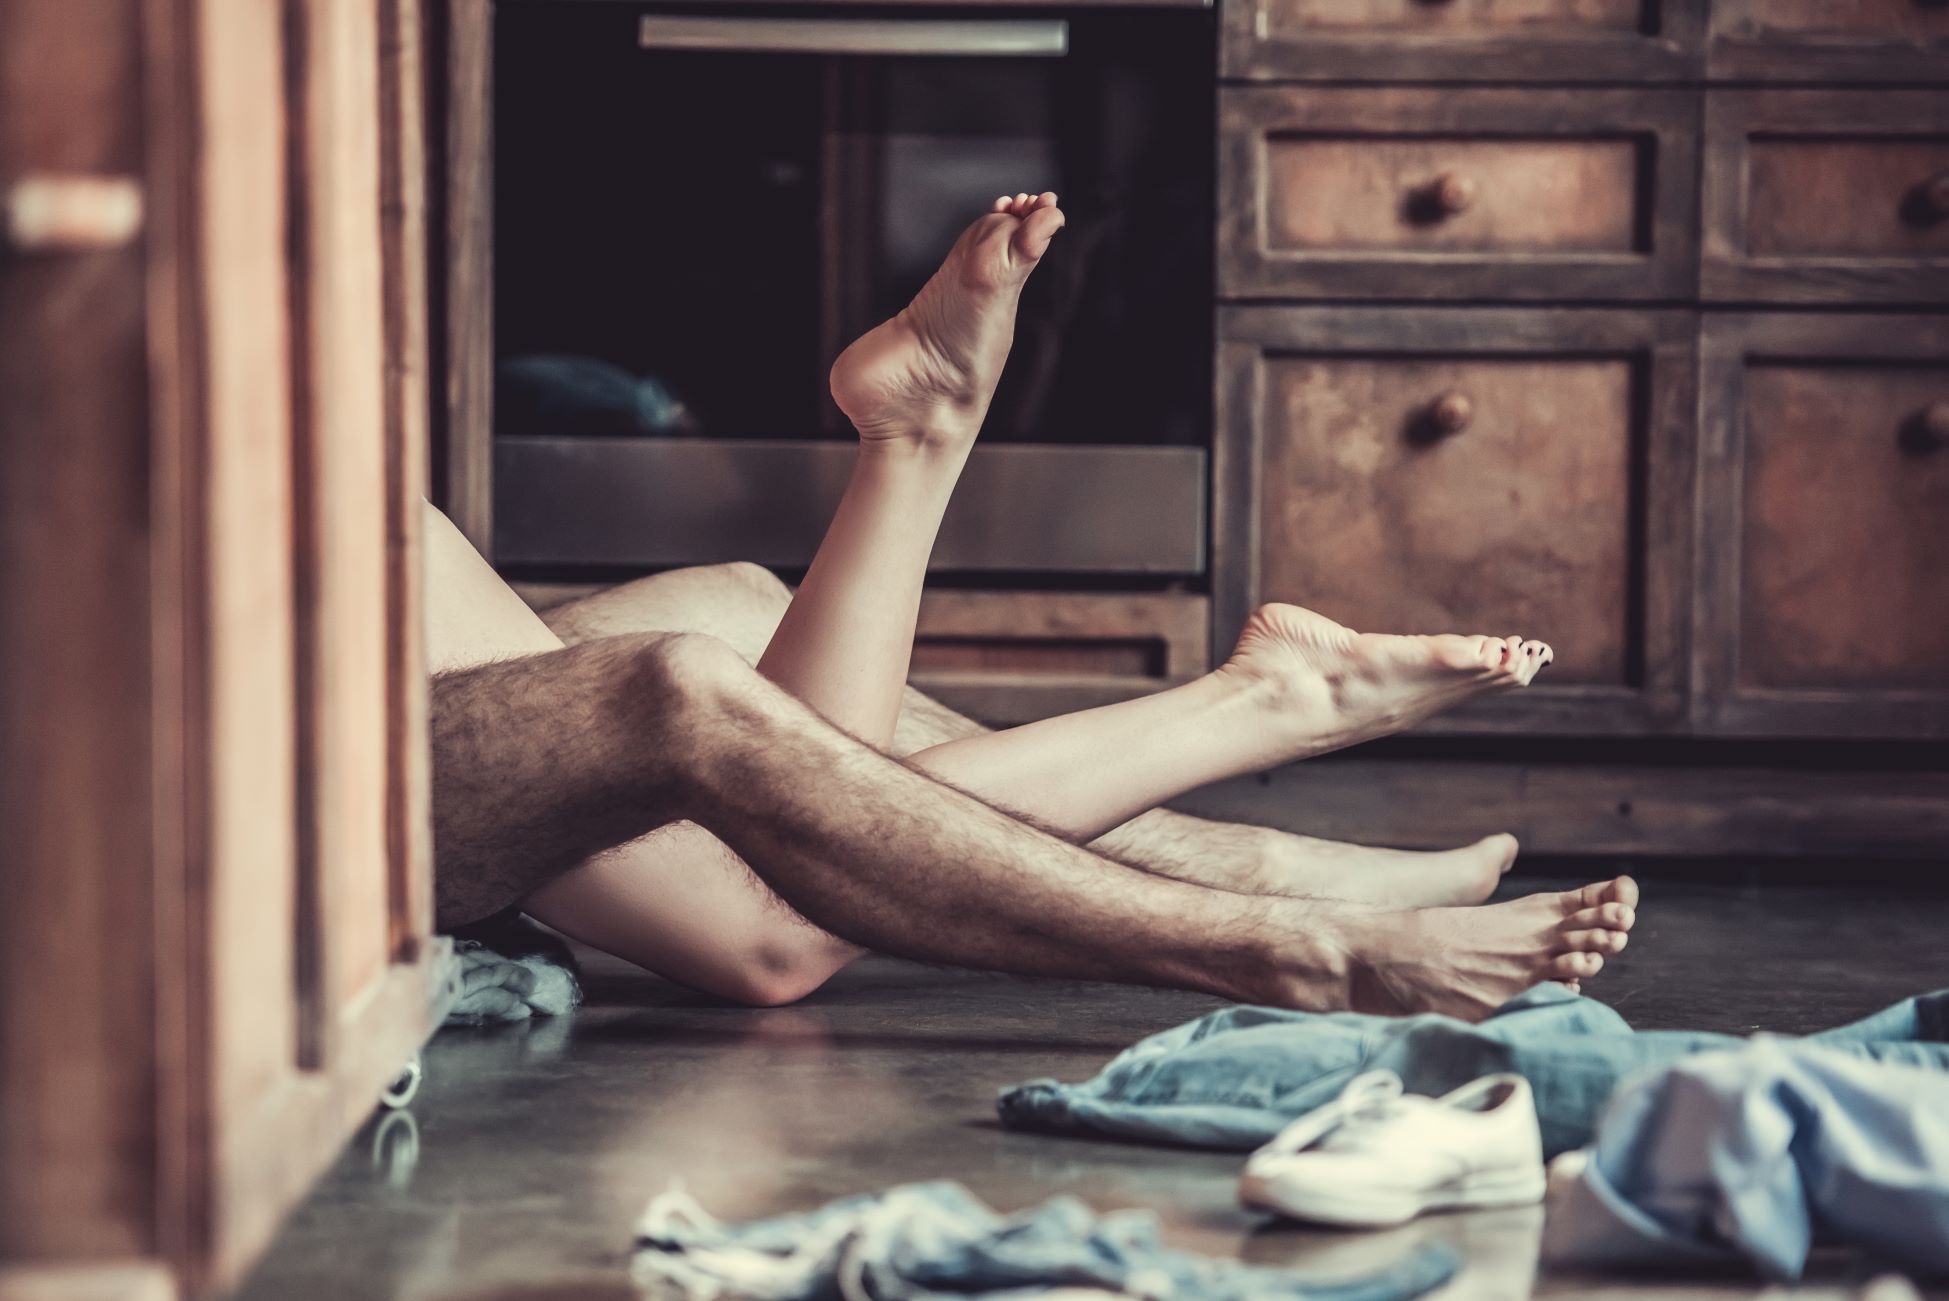 Photo: VGstockstudio via <a href="https://www.shutterstock.com/image-photo/passionate-love-view-feet-young-couple-639794776" rel="noopener" target="_blank">Shutterstock</a>